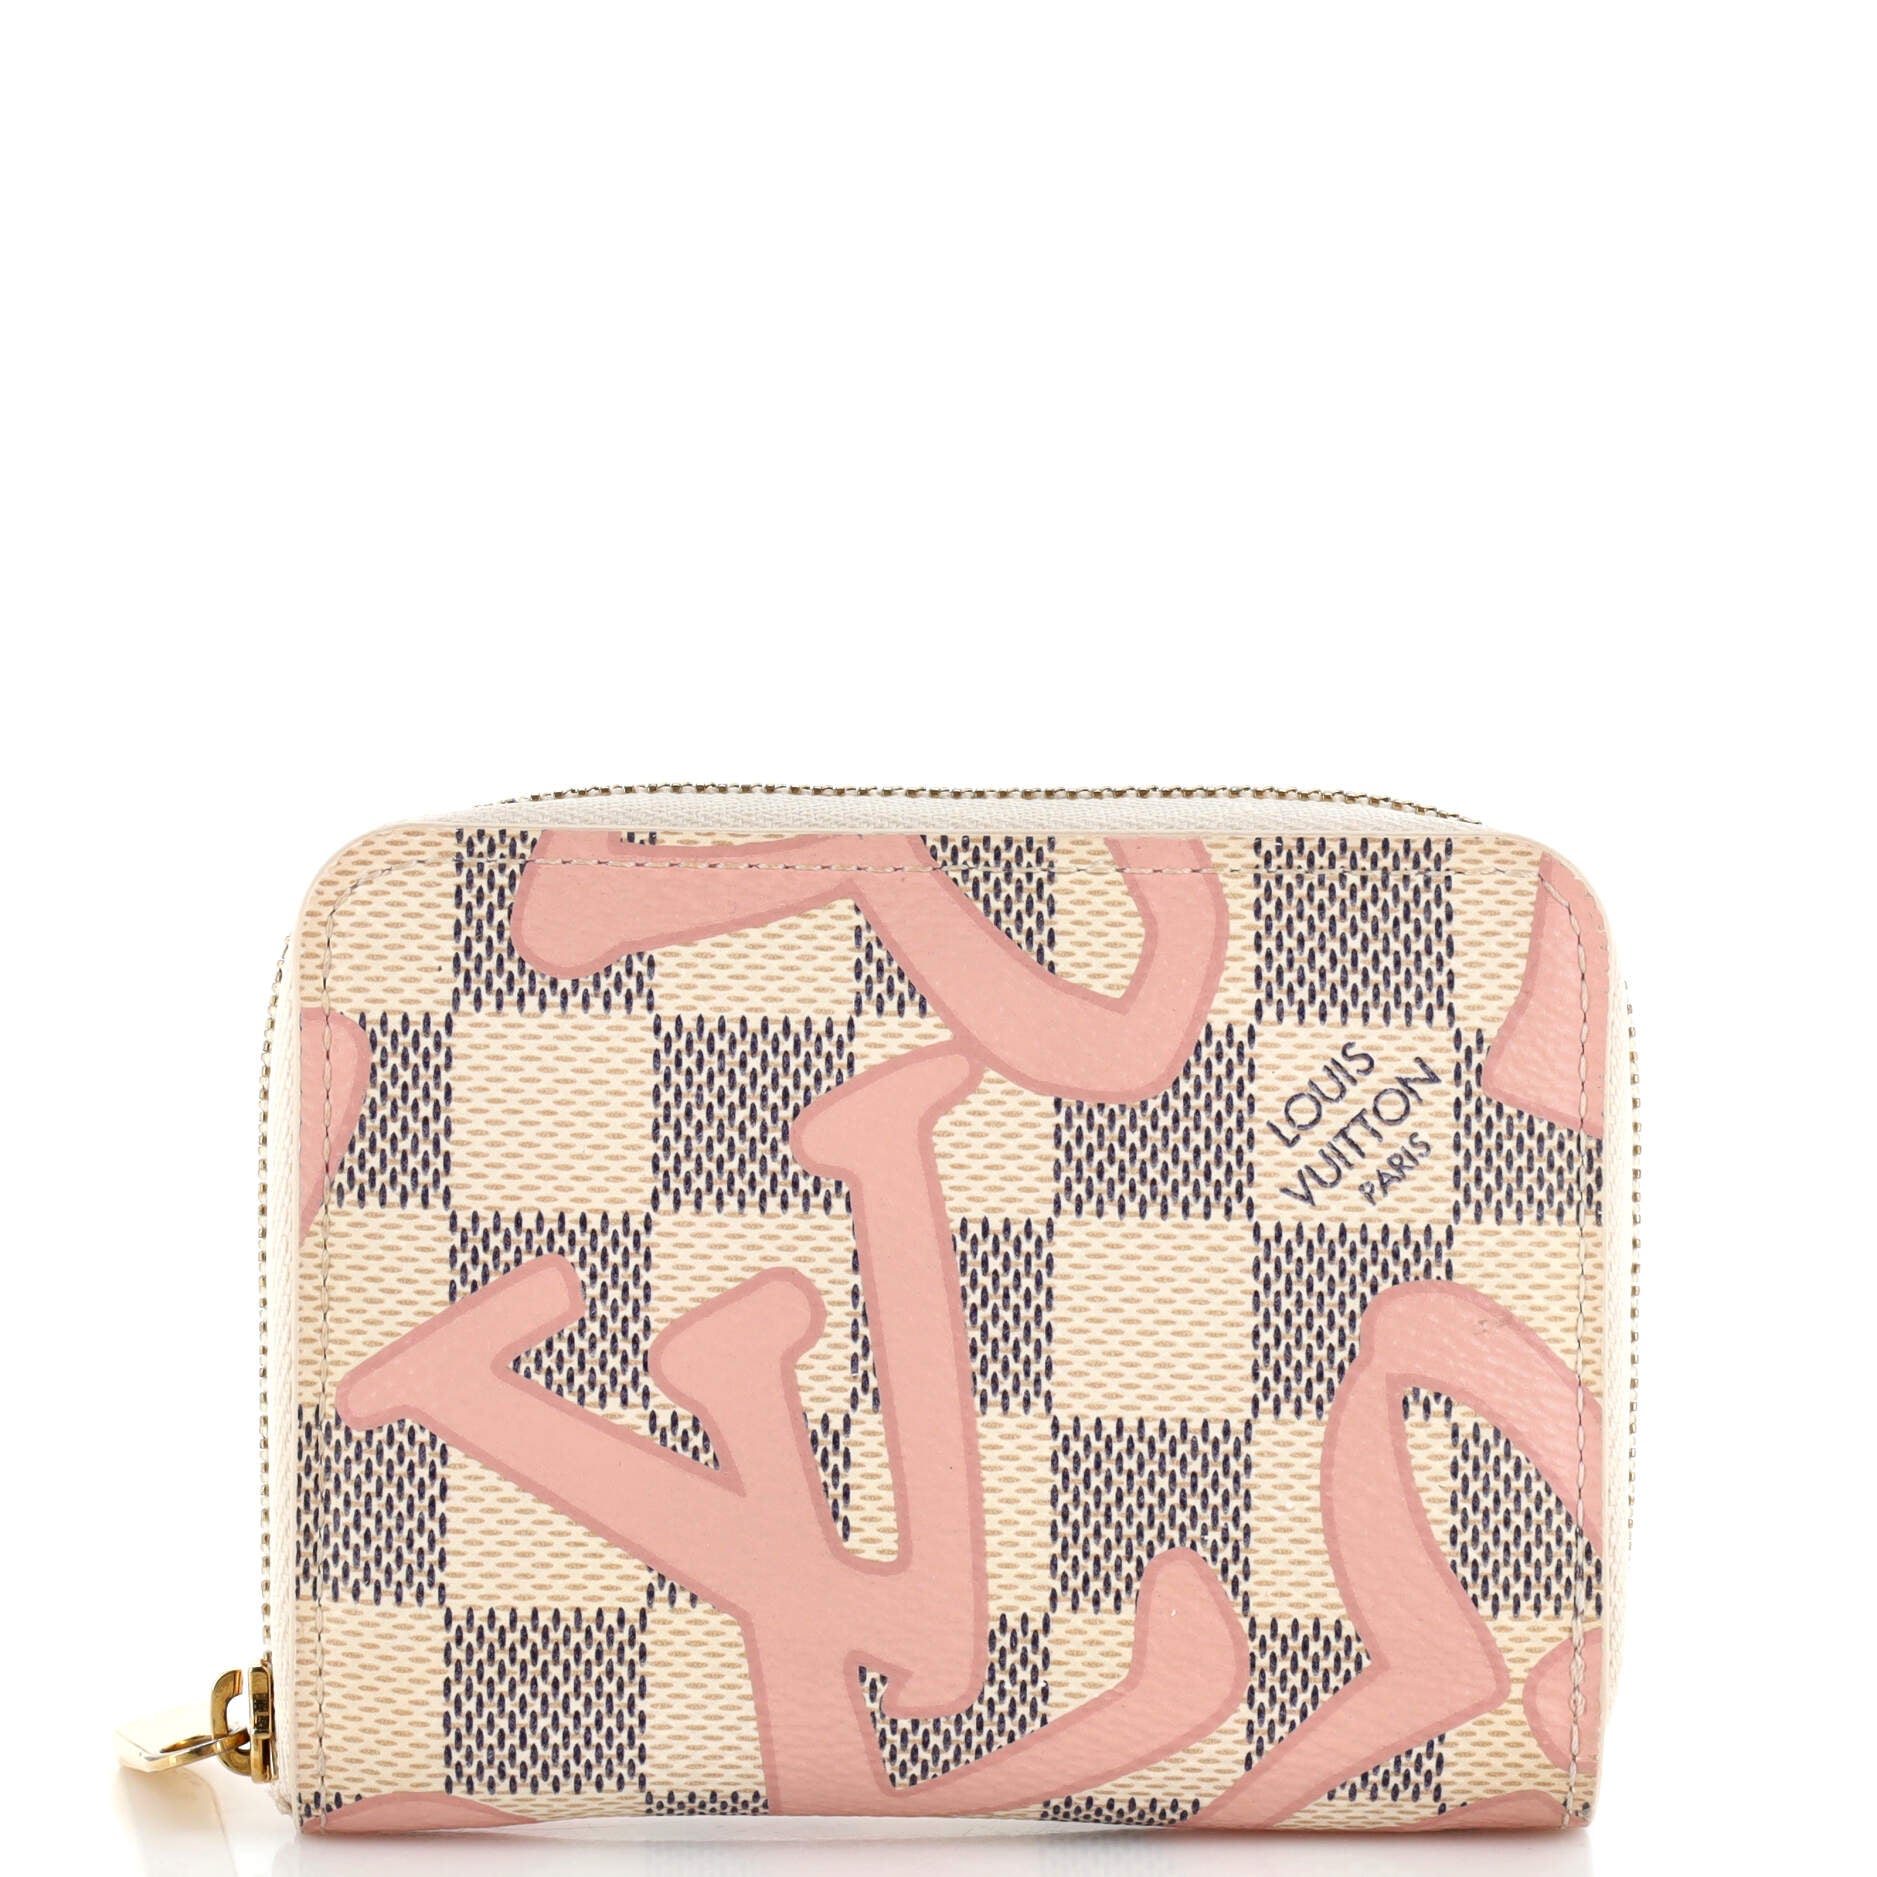 Zippy Coin Purse Limited Edition Damier Tahitienne